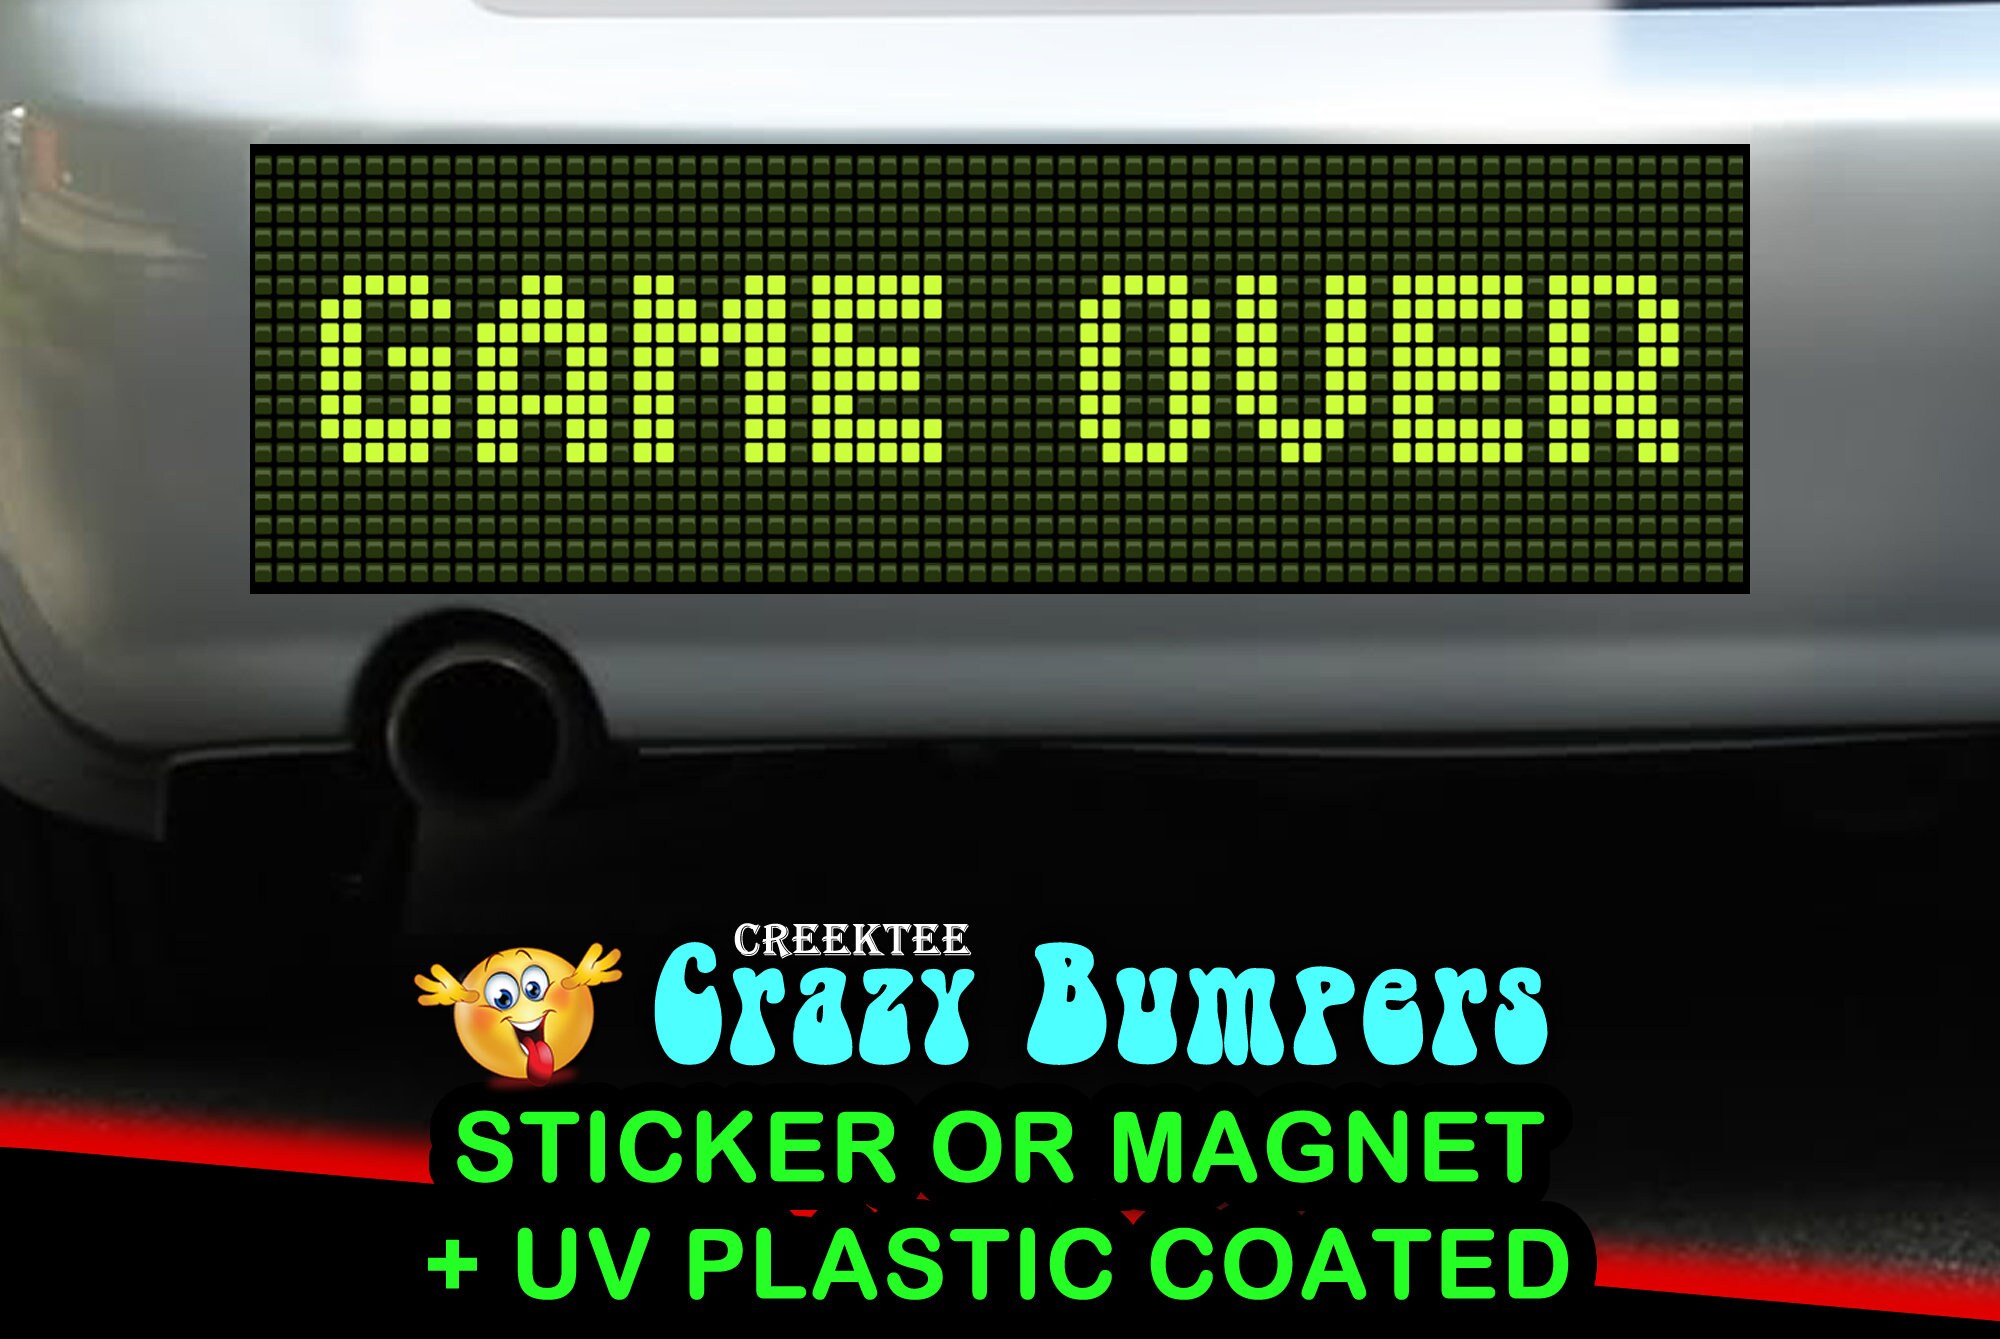 Game Over bumper sticker or magnet, 9 x 2.7 or 10 x 3 Sticker Magnet or bumper sticker or bumper magnet